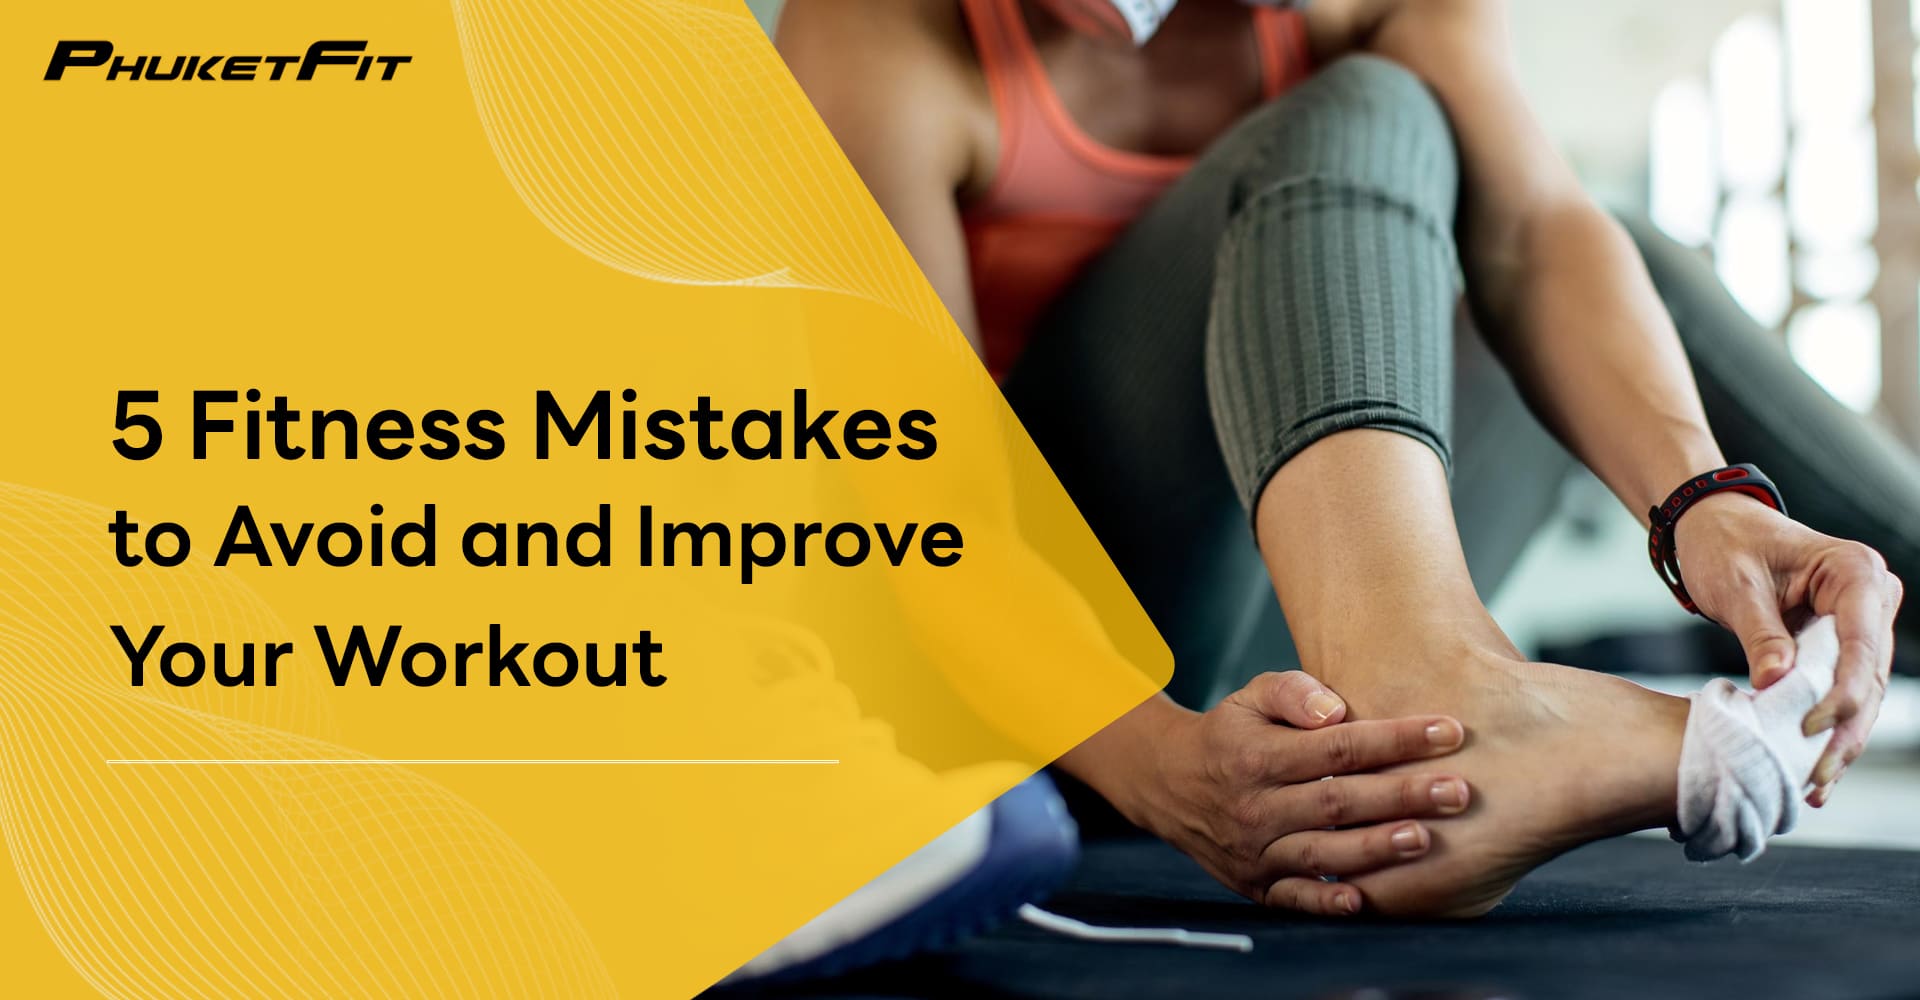 5-Fitness-Mistakes-to-Avoid-and-Improve-Your-Workout